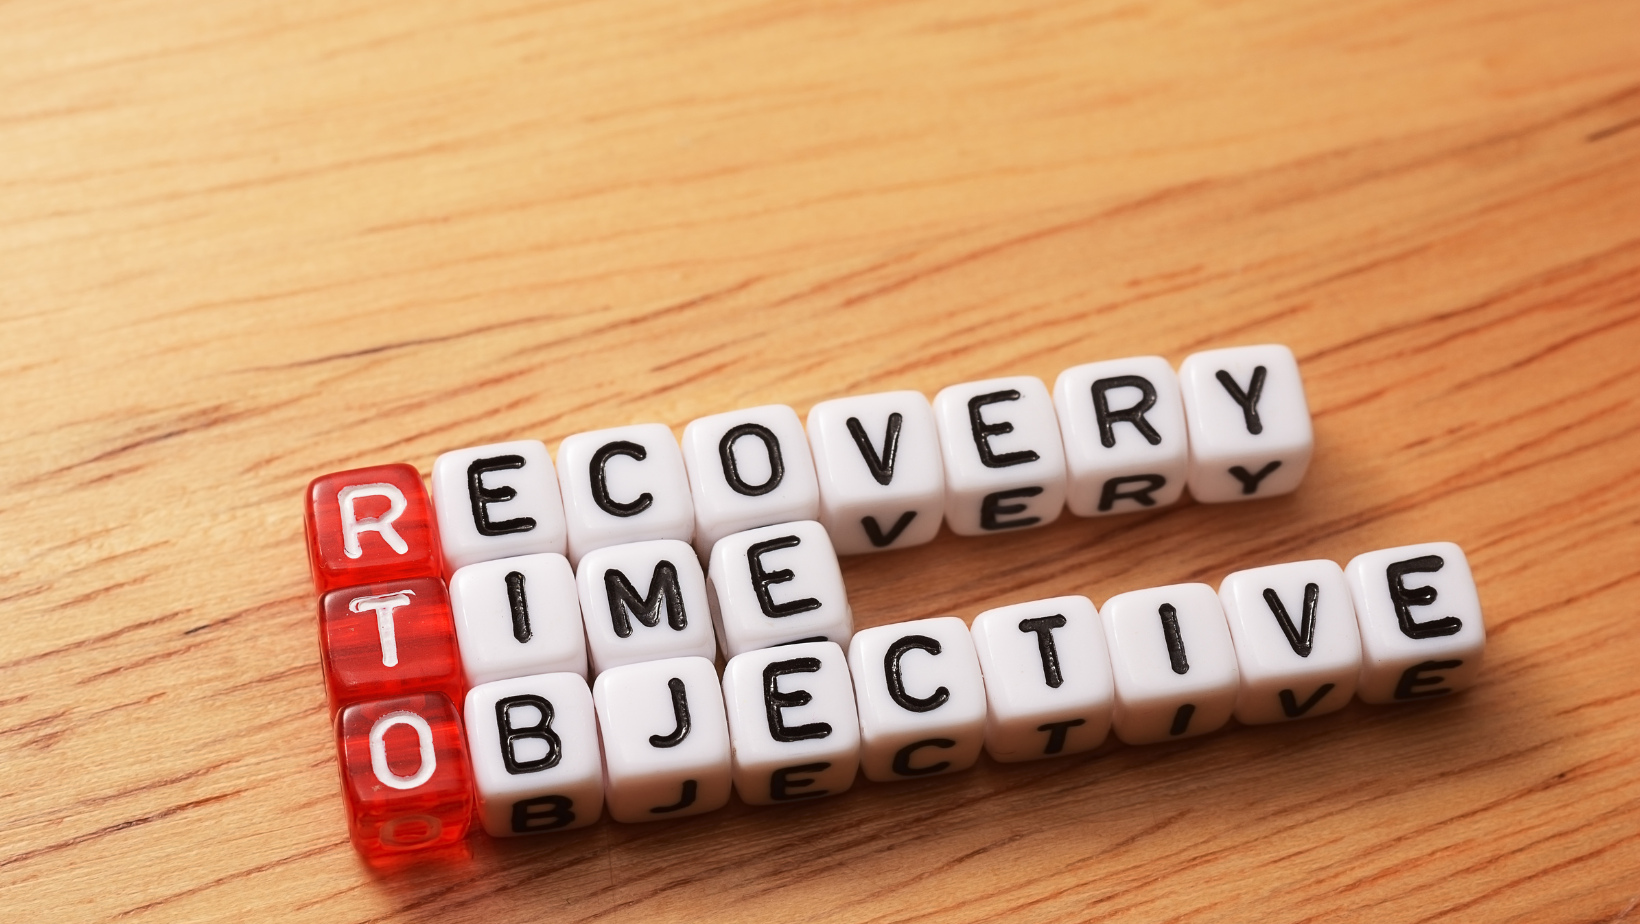 Types of disaster recovery testing